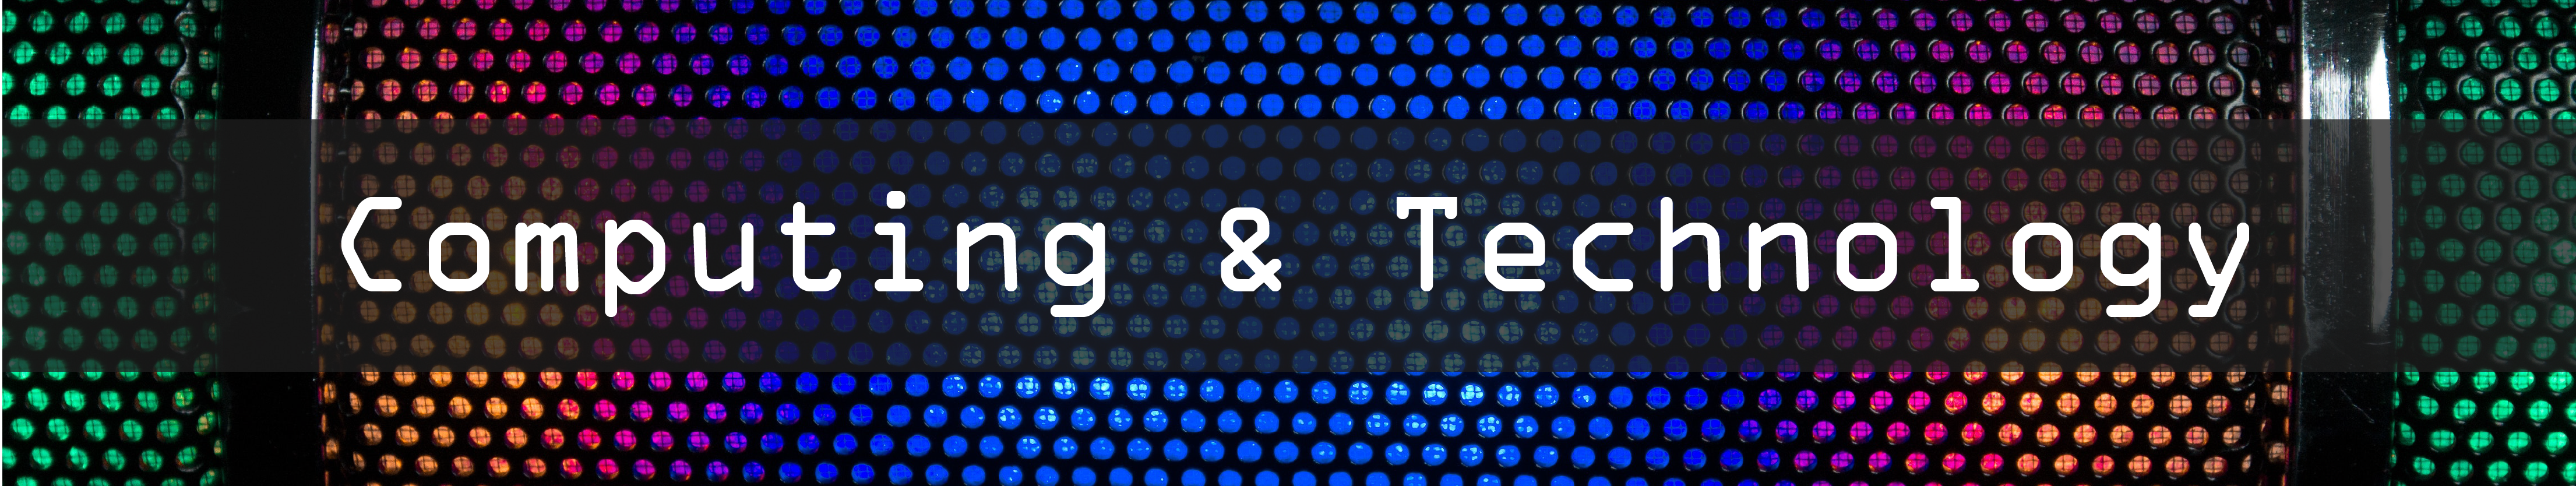 Computing and Technology banner.